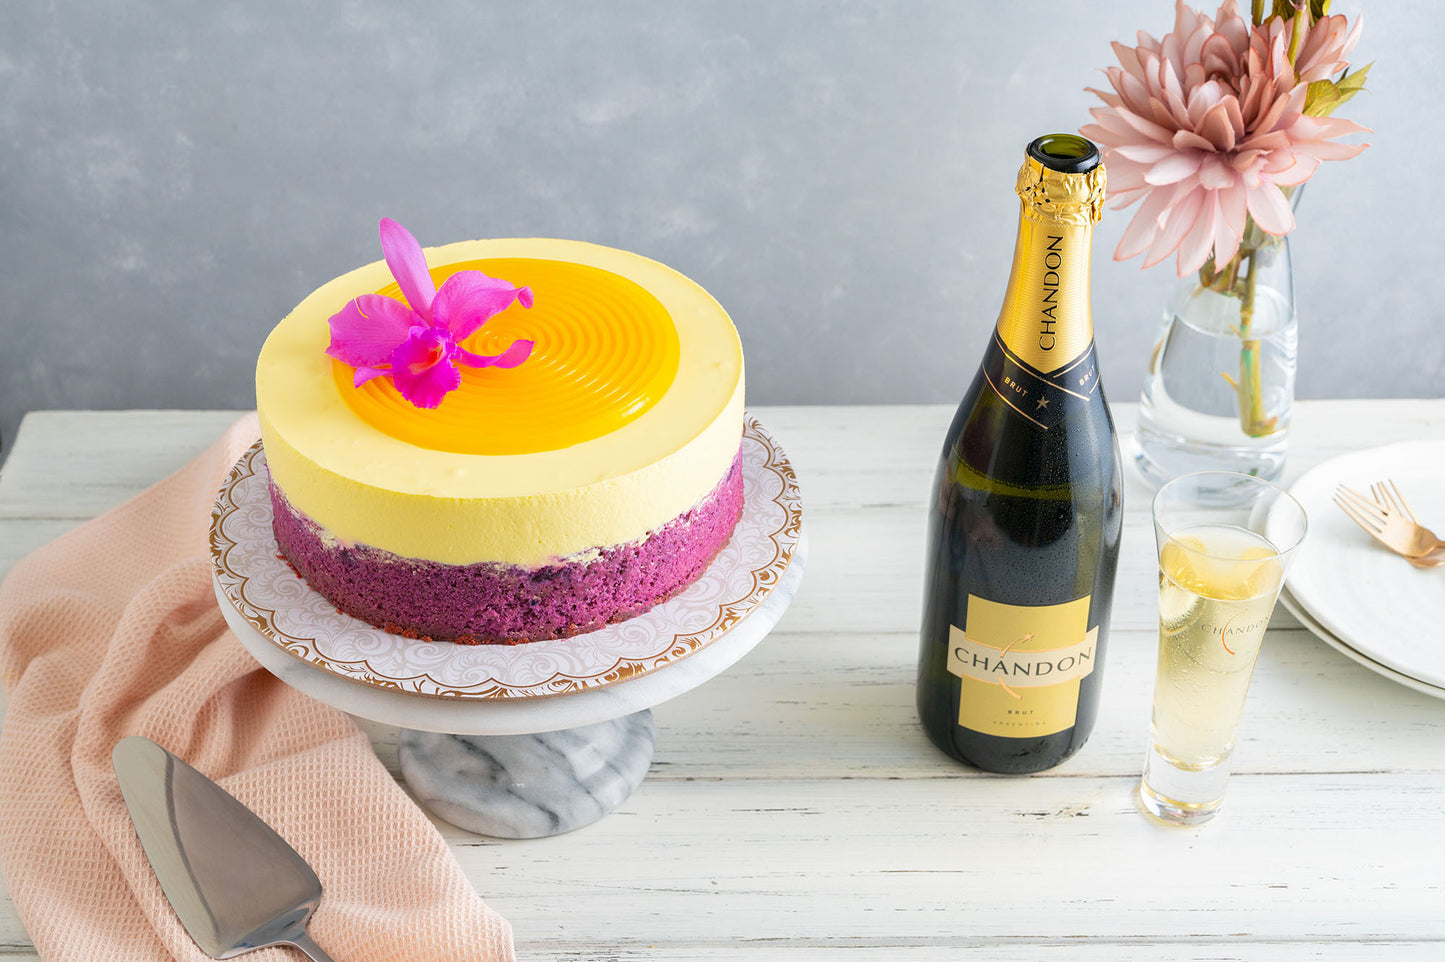 Passionfruit and Blueberry Mousse Cake with a Bottle of Chandon - Brut